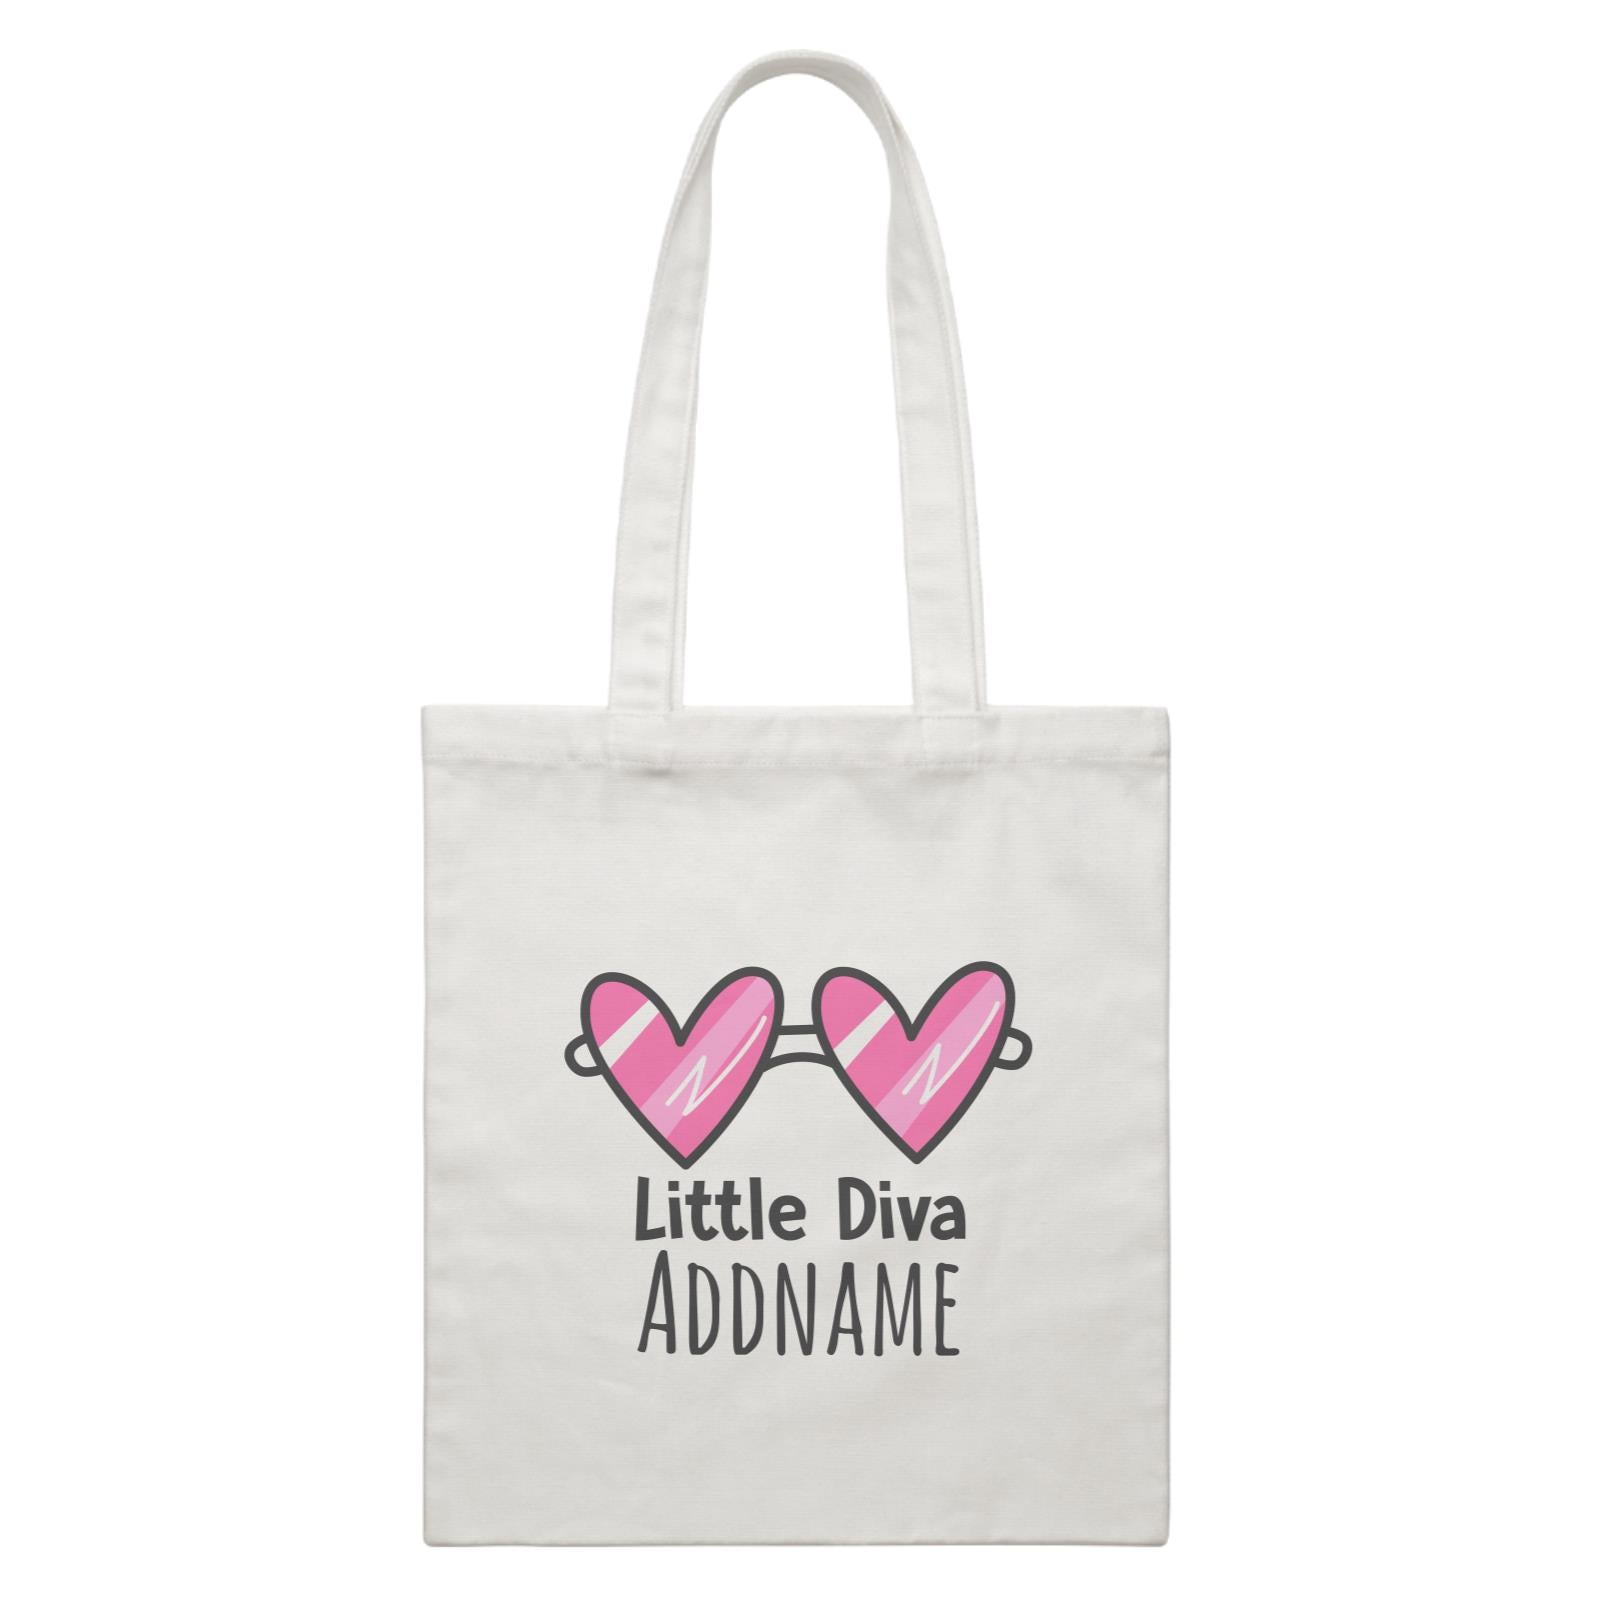 Drawn Baby Elements Little Diva Addname White Canvas Bag